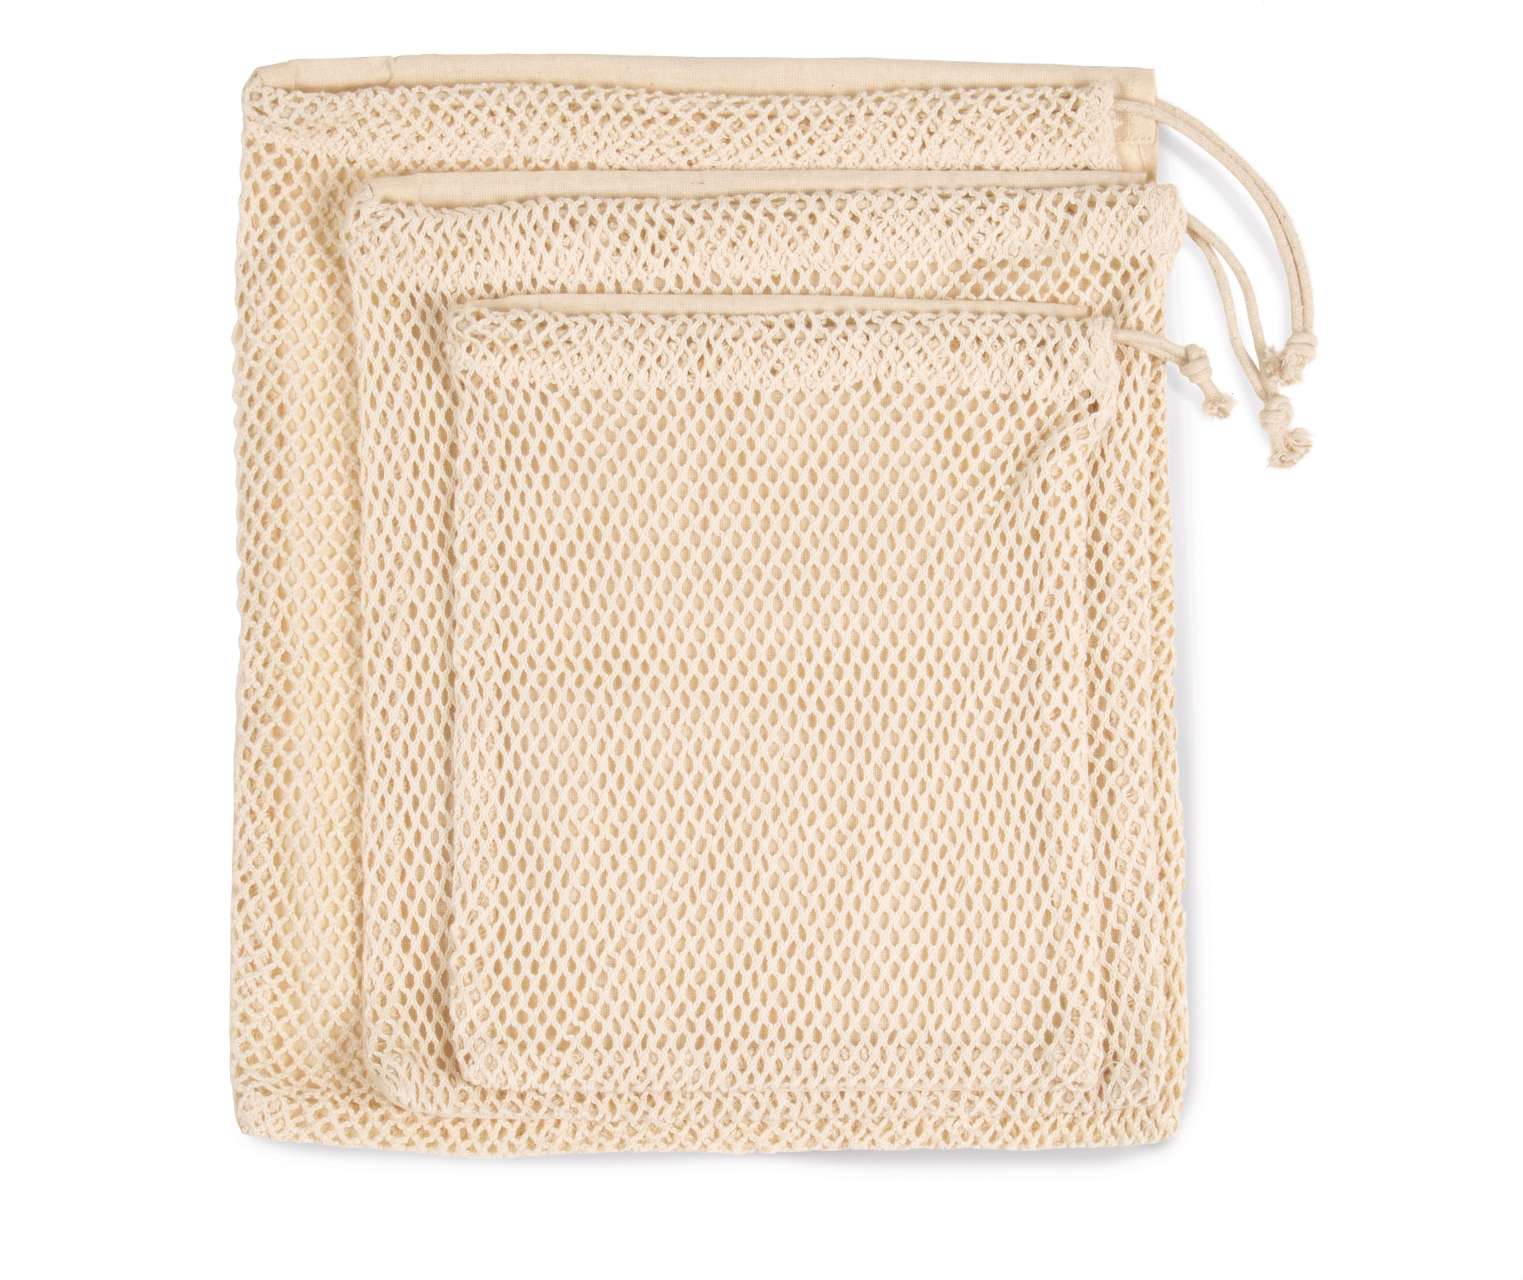 Promo  MESH BAG WITH DRAWSTRING CARRY HANDLE